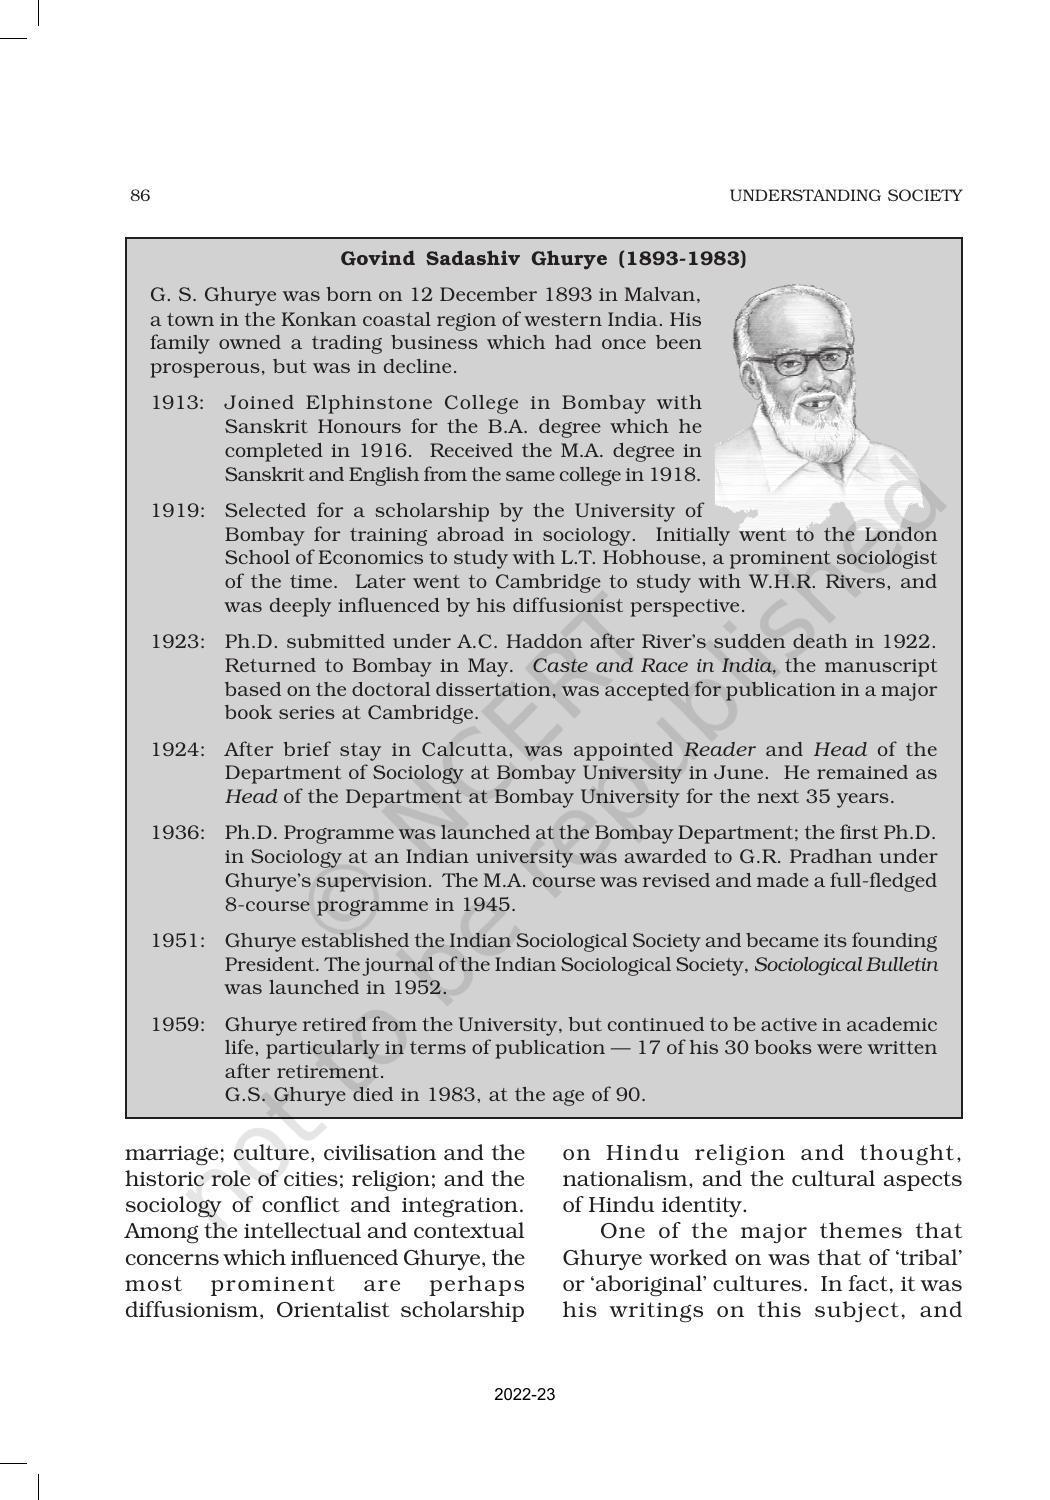 NCERT Book for Class 11 Sociology (Part-II) Chapter 5 Indian Sociologists - Page 4